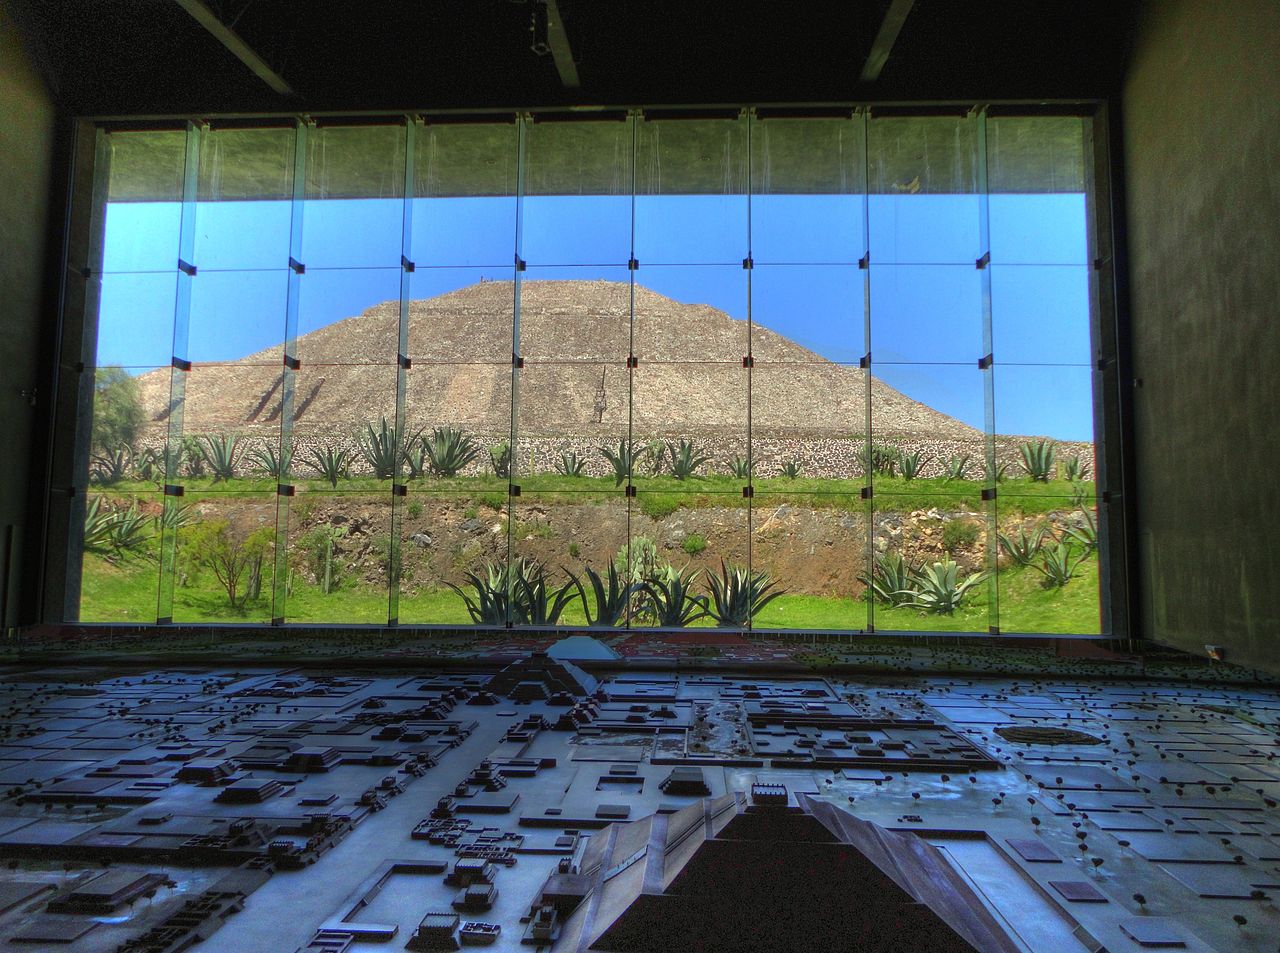 TEOTIHUACAN EMPIRE MILITARY GIANT